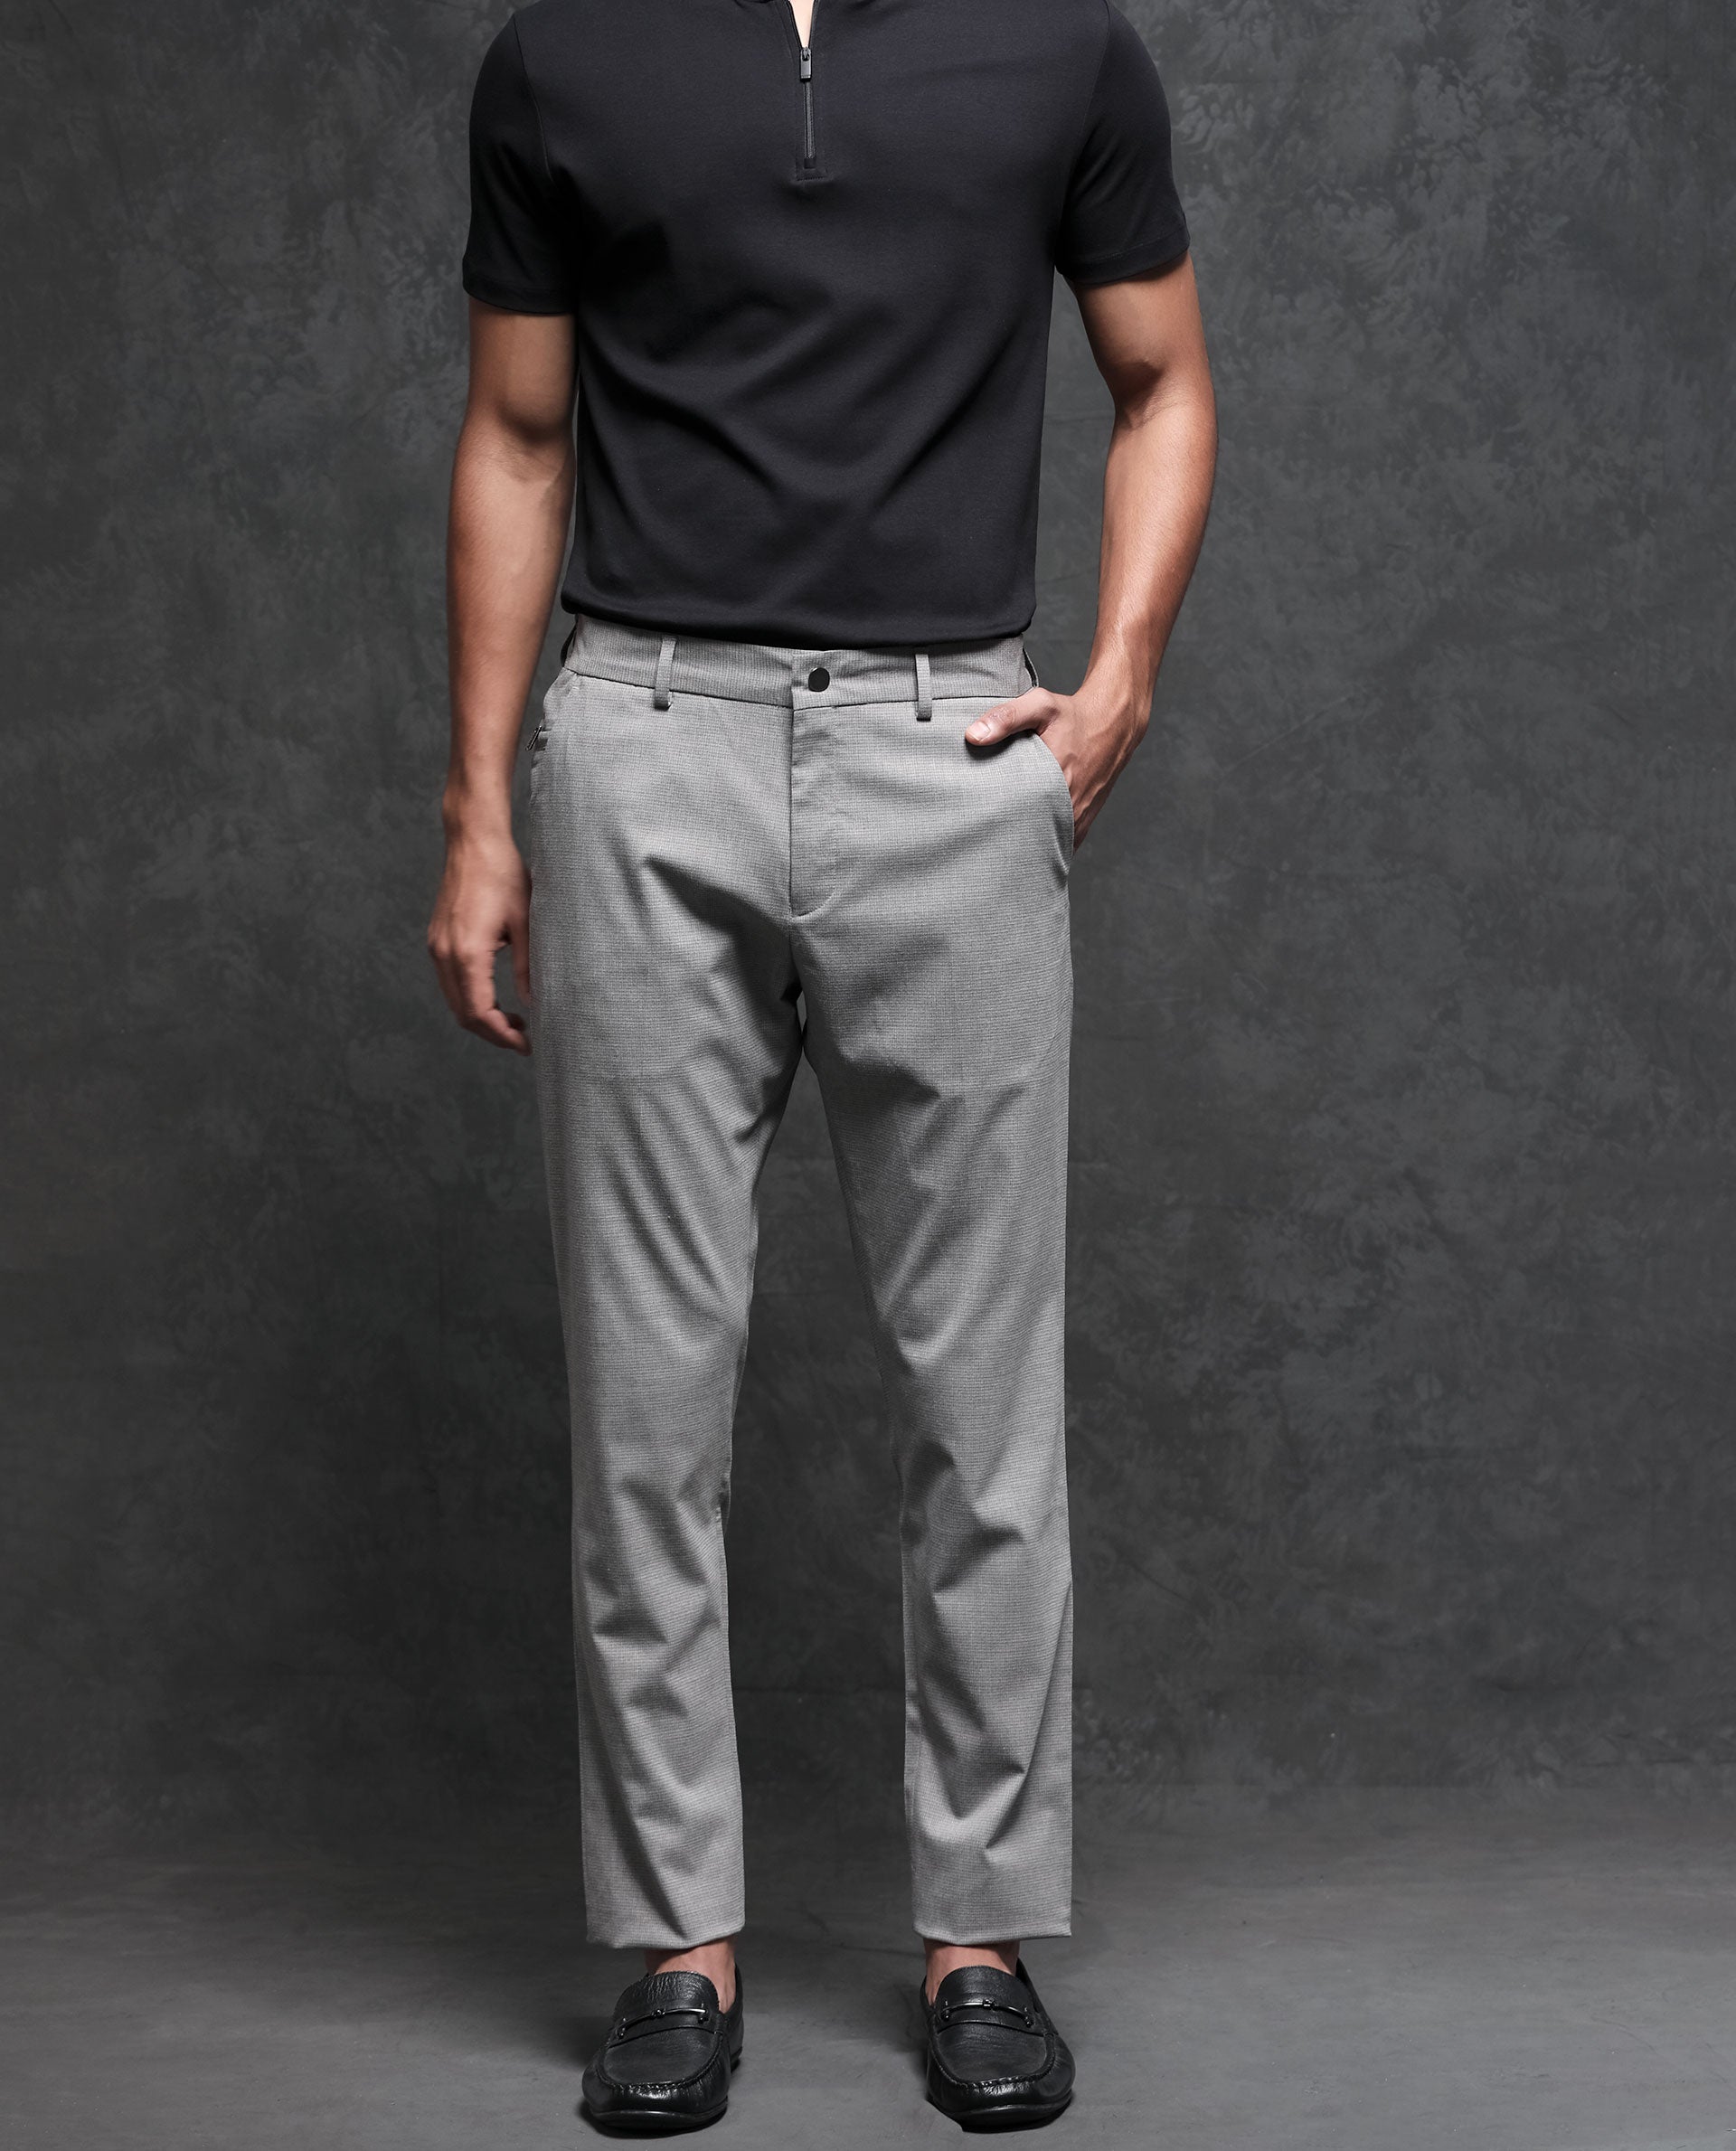 Buy Gray Plain Unstitched Trouser Cotton Wool Pant Fabric for Best Price,  Reviews, Free Shipping